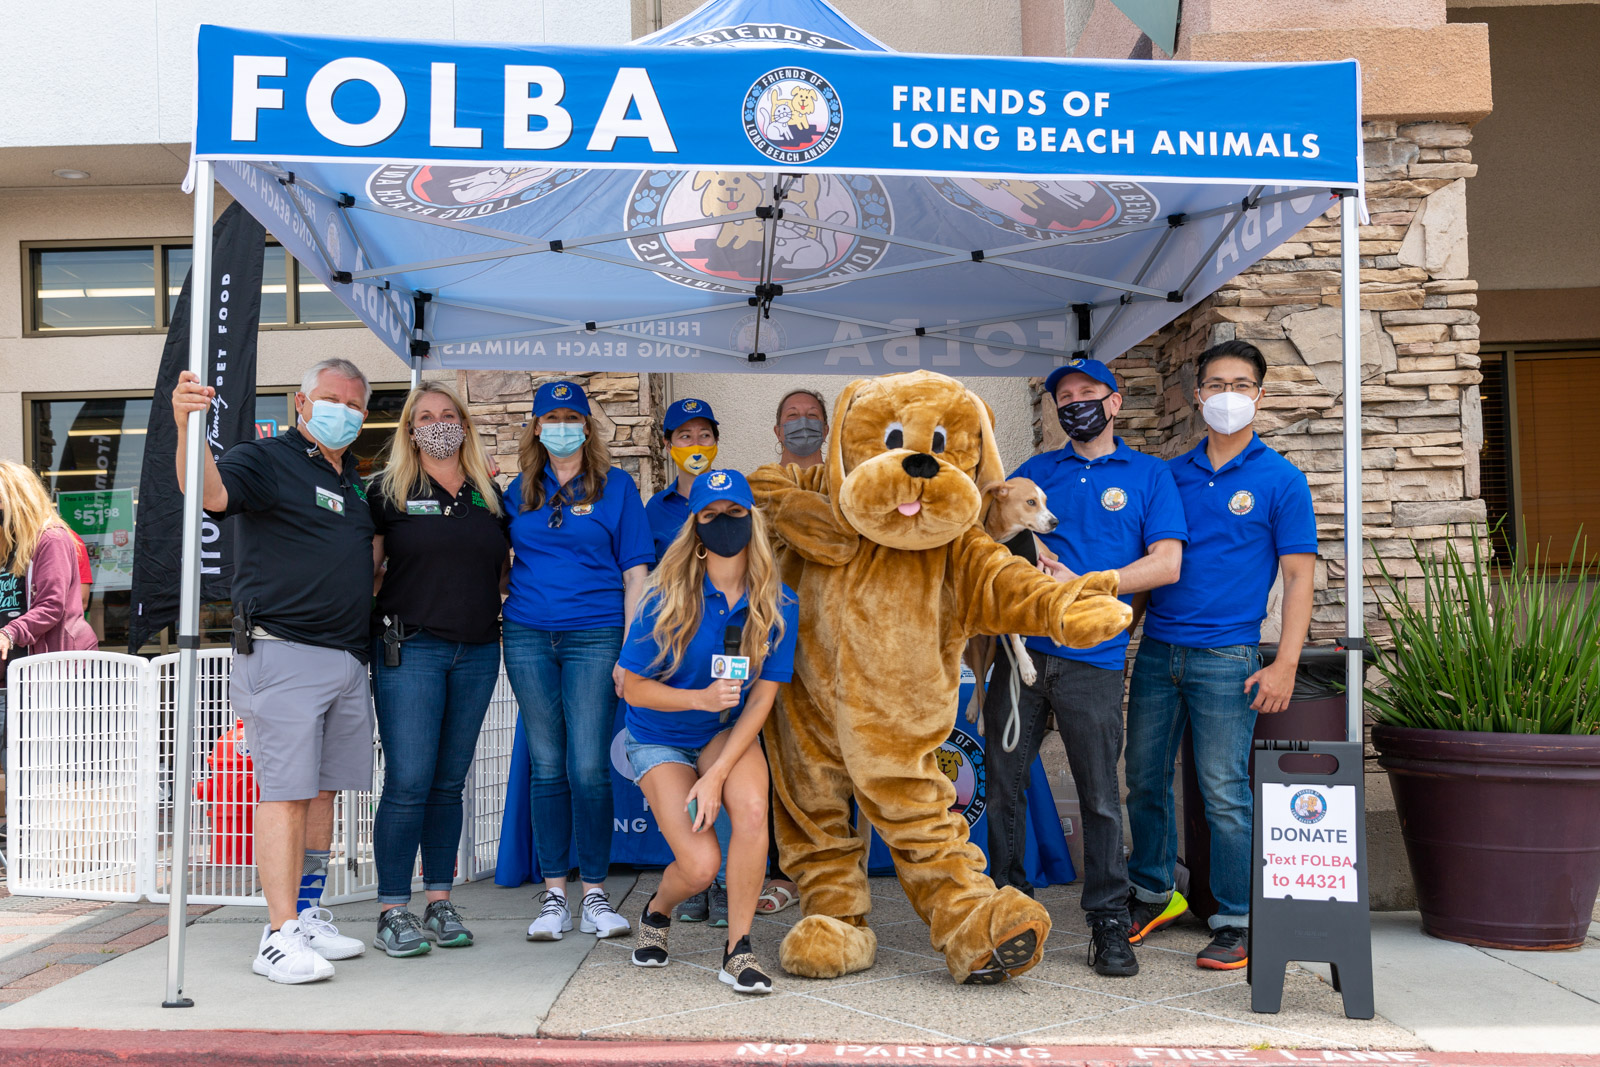 FOLBA out meeting the community at Pet Supplies Plus 1 Year Anniversary